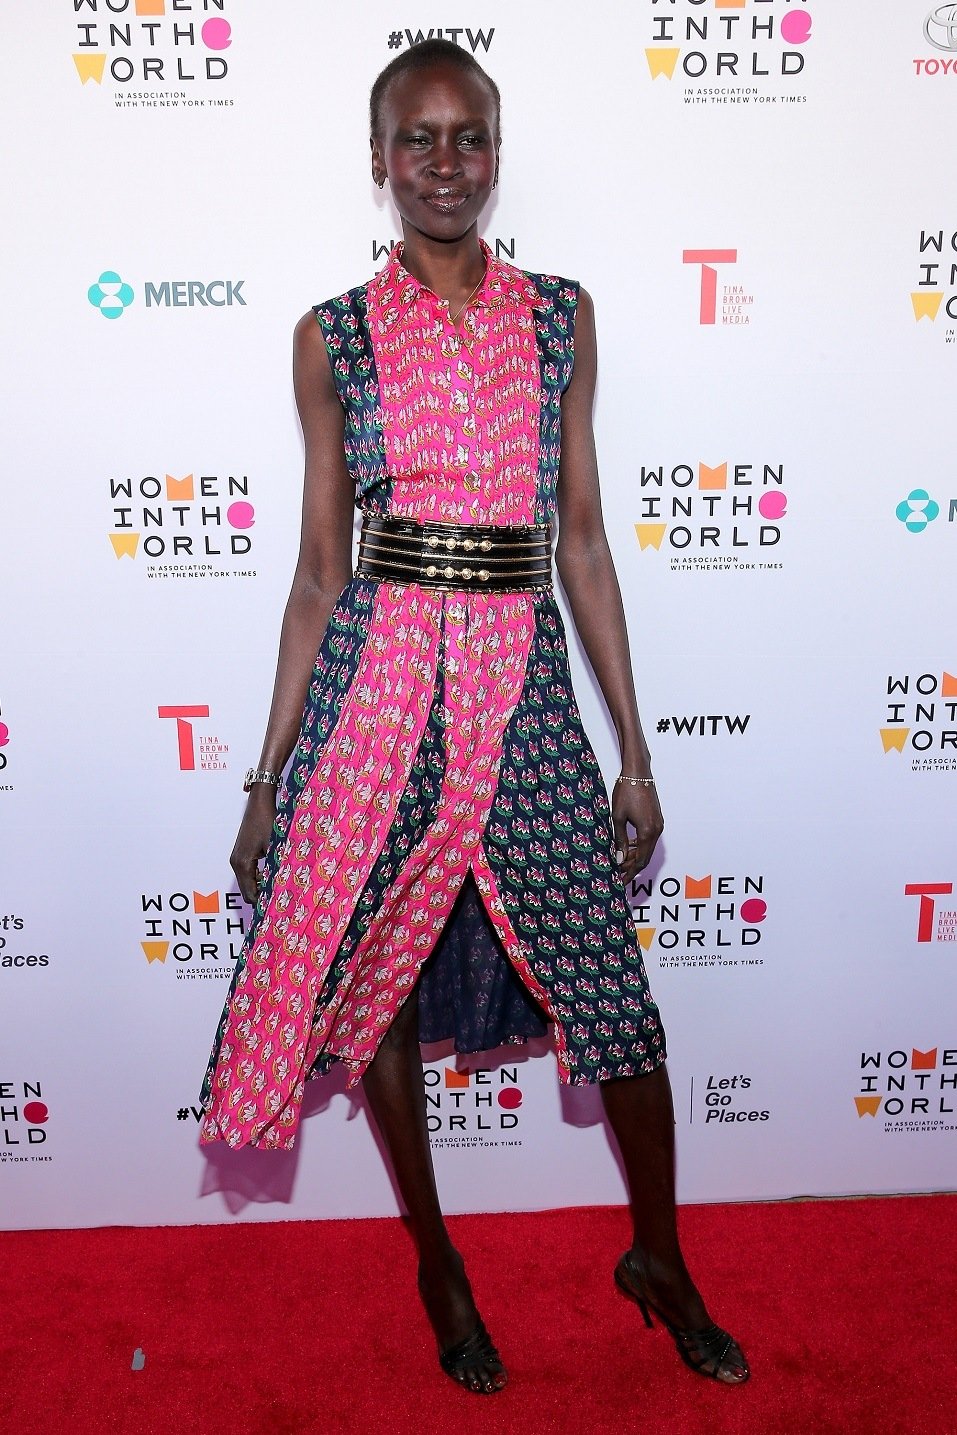 Model Alek Wek attends Tina Brown's 7th Annual Women In The World Summit Opening Night